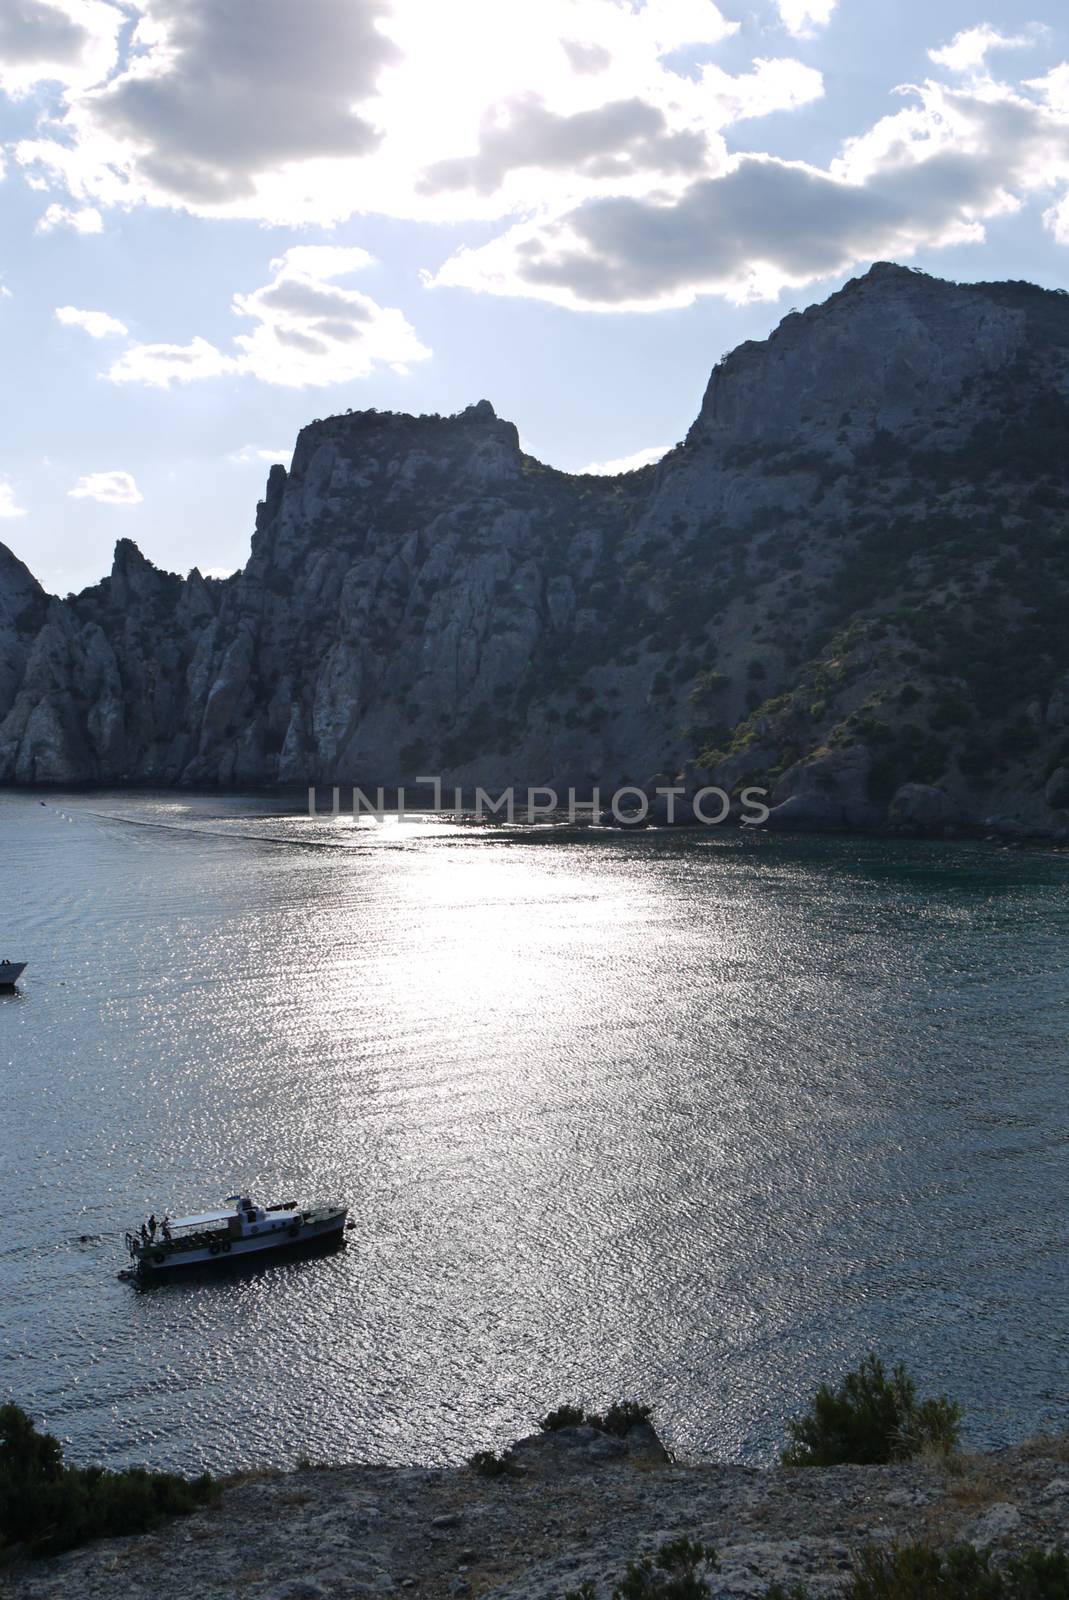 bay in the black sea on the background of steep cliffs covered with grass. Walking on a boat